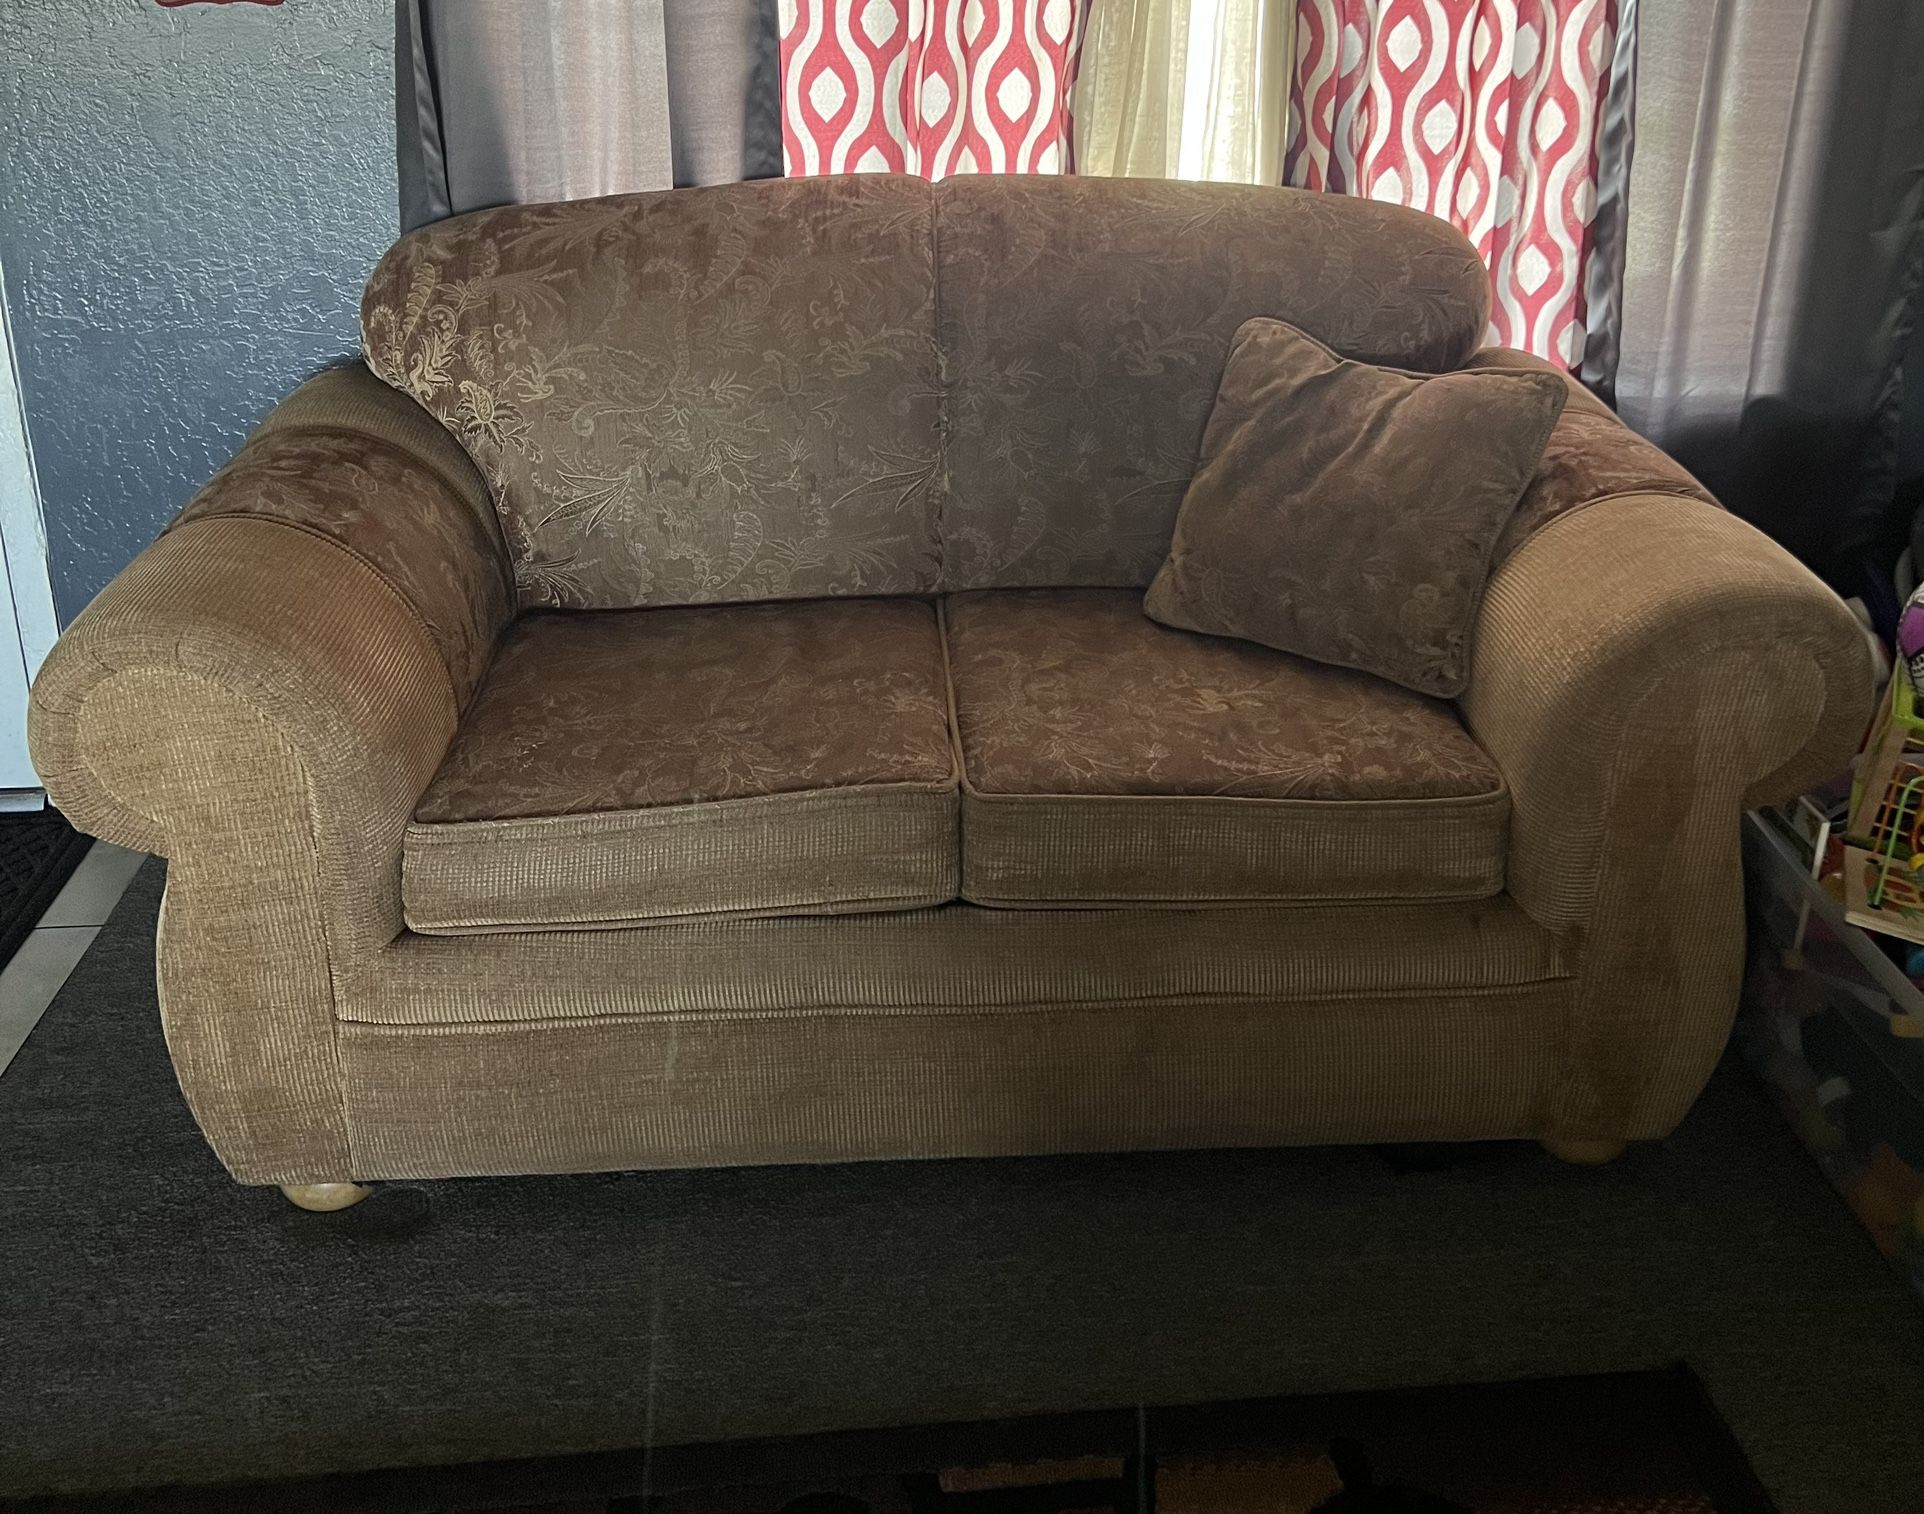 Couches (free) 